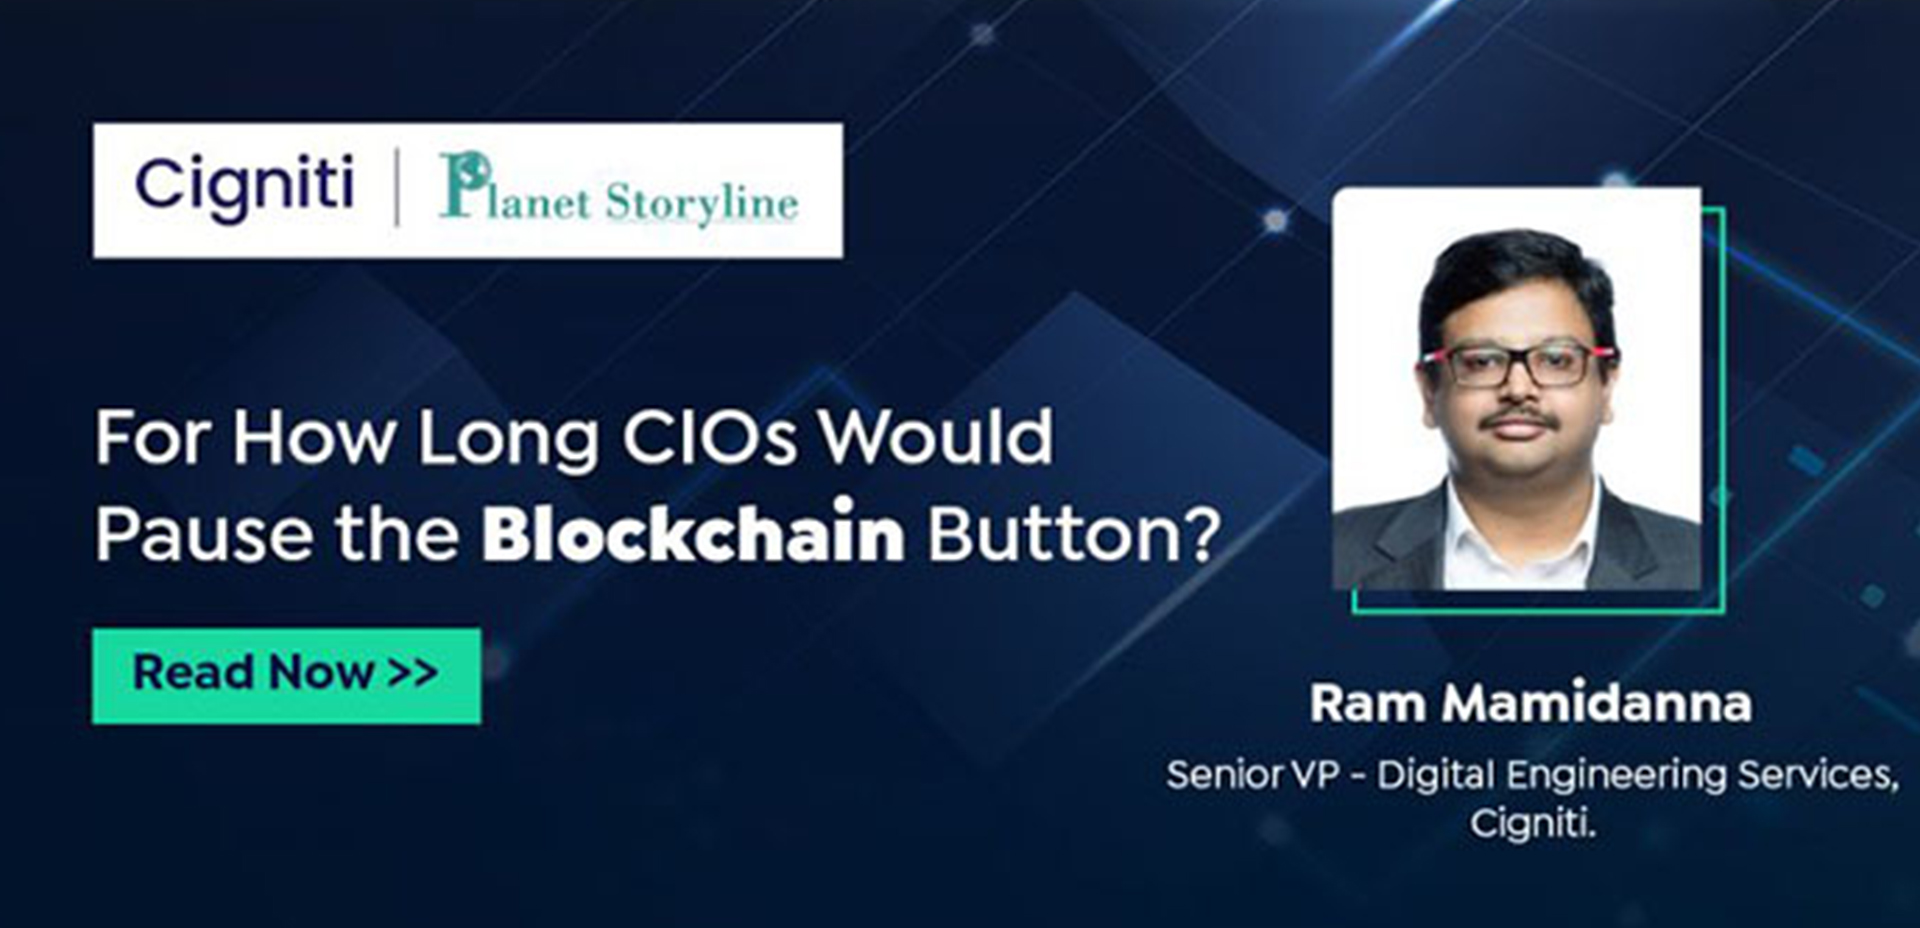 For How Long Would CIOs Pause the Blockchain Button?